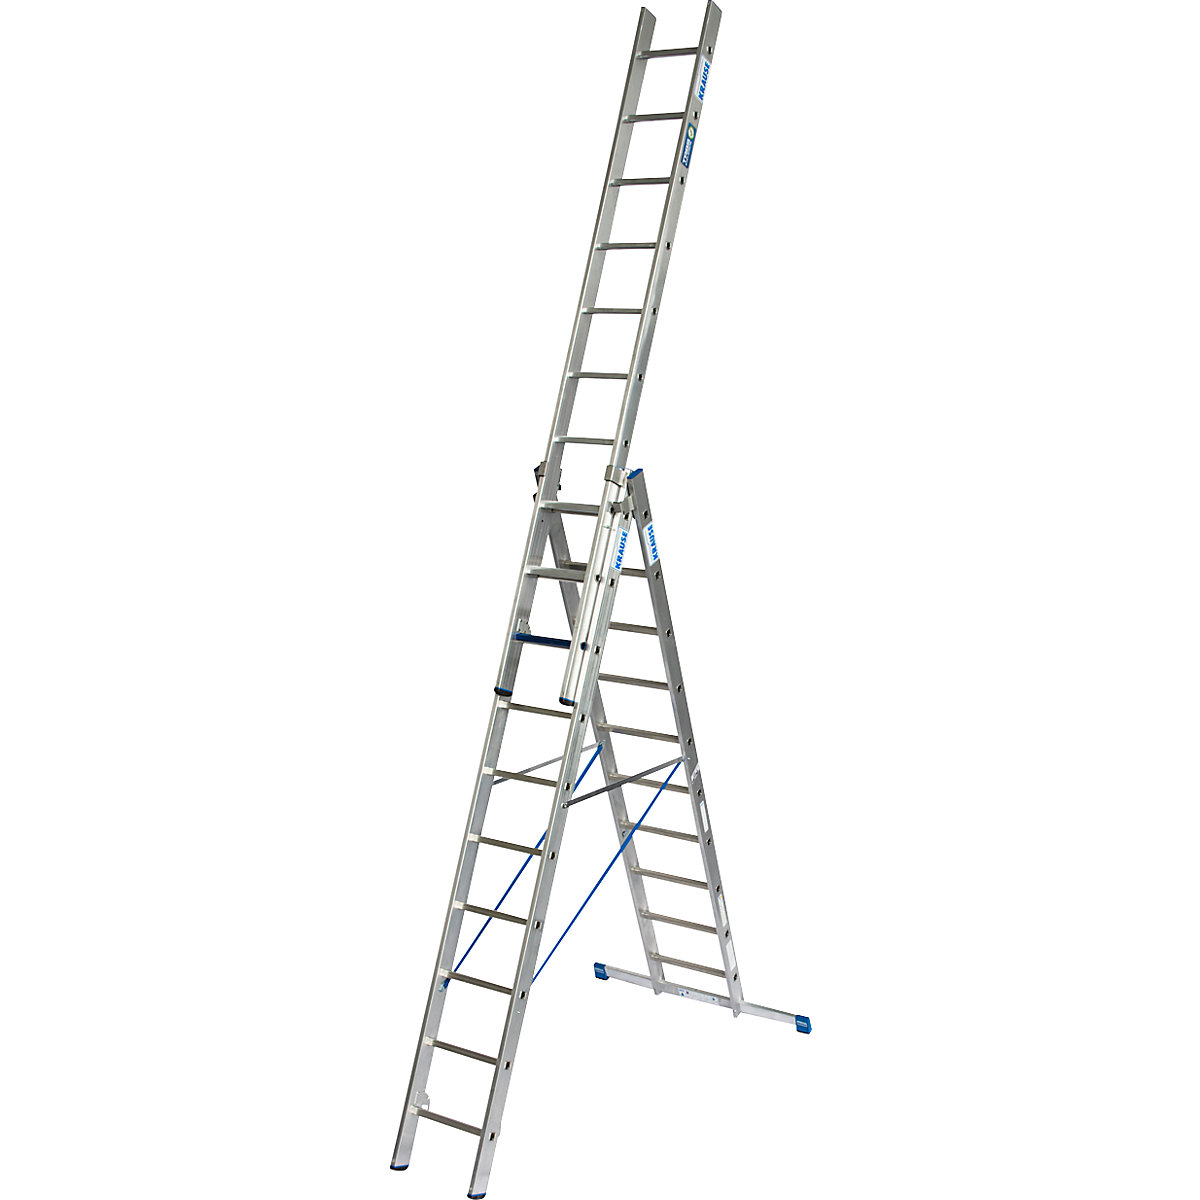 STABILO + S professional multi-purpose ladder – KRAUSE, 3 parts, step-rung combination, 3 x 10 steps/rungs-19